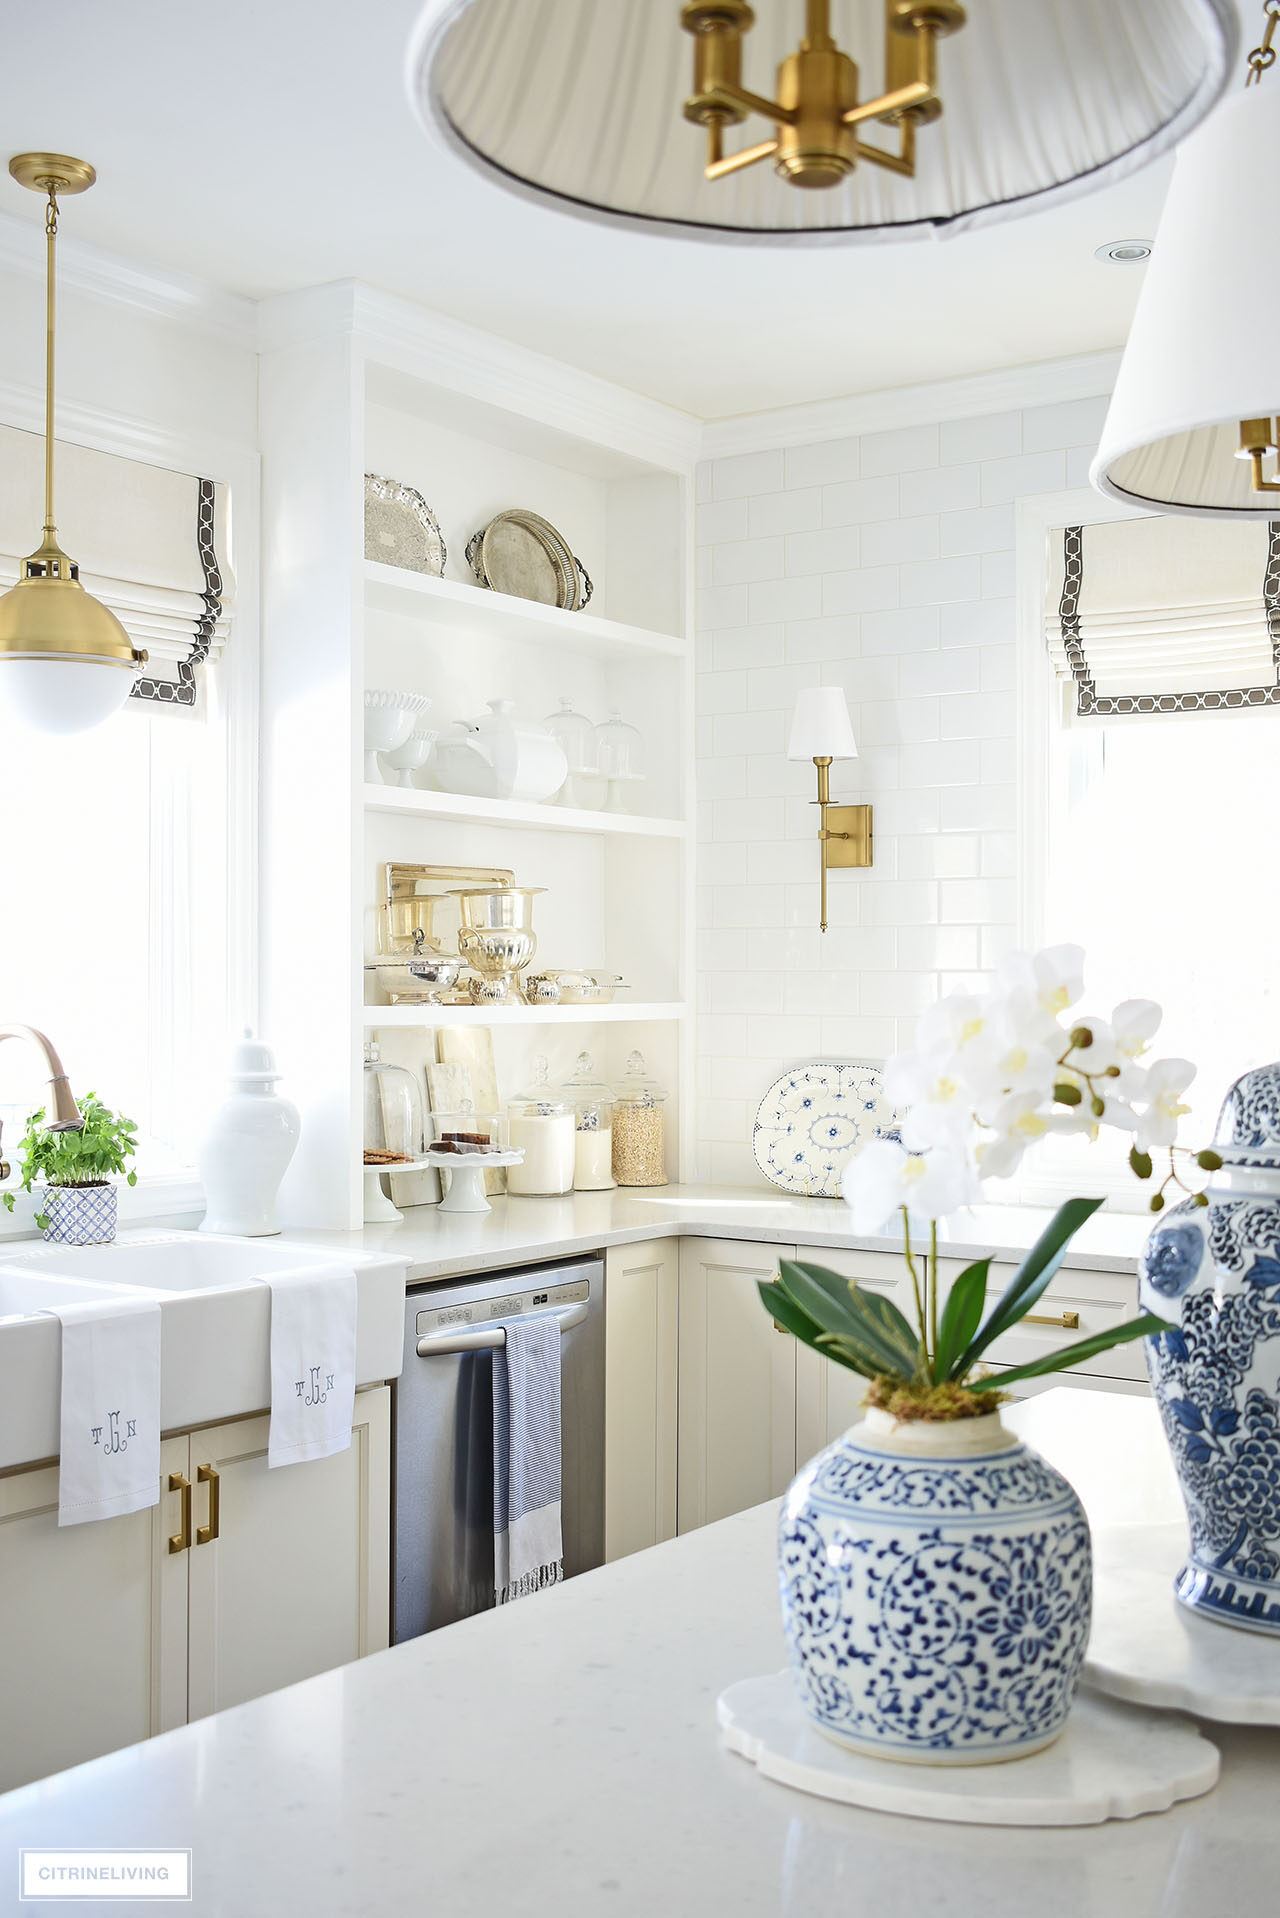 Elegant and classic kitchen decorated for spring with blue and white chinoiserie.